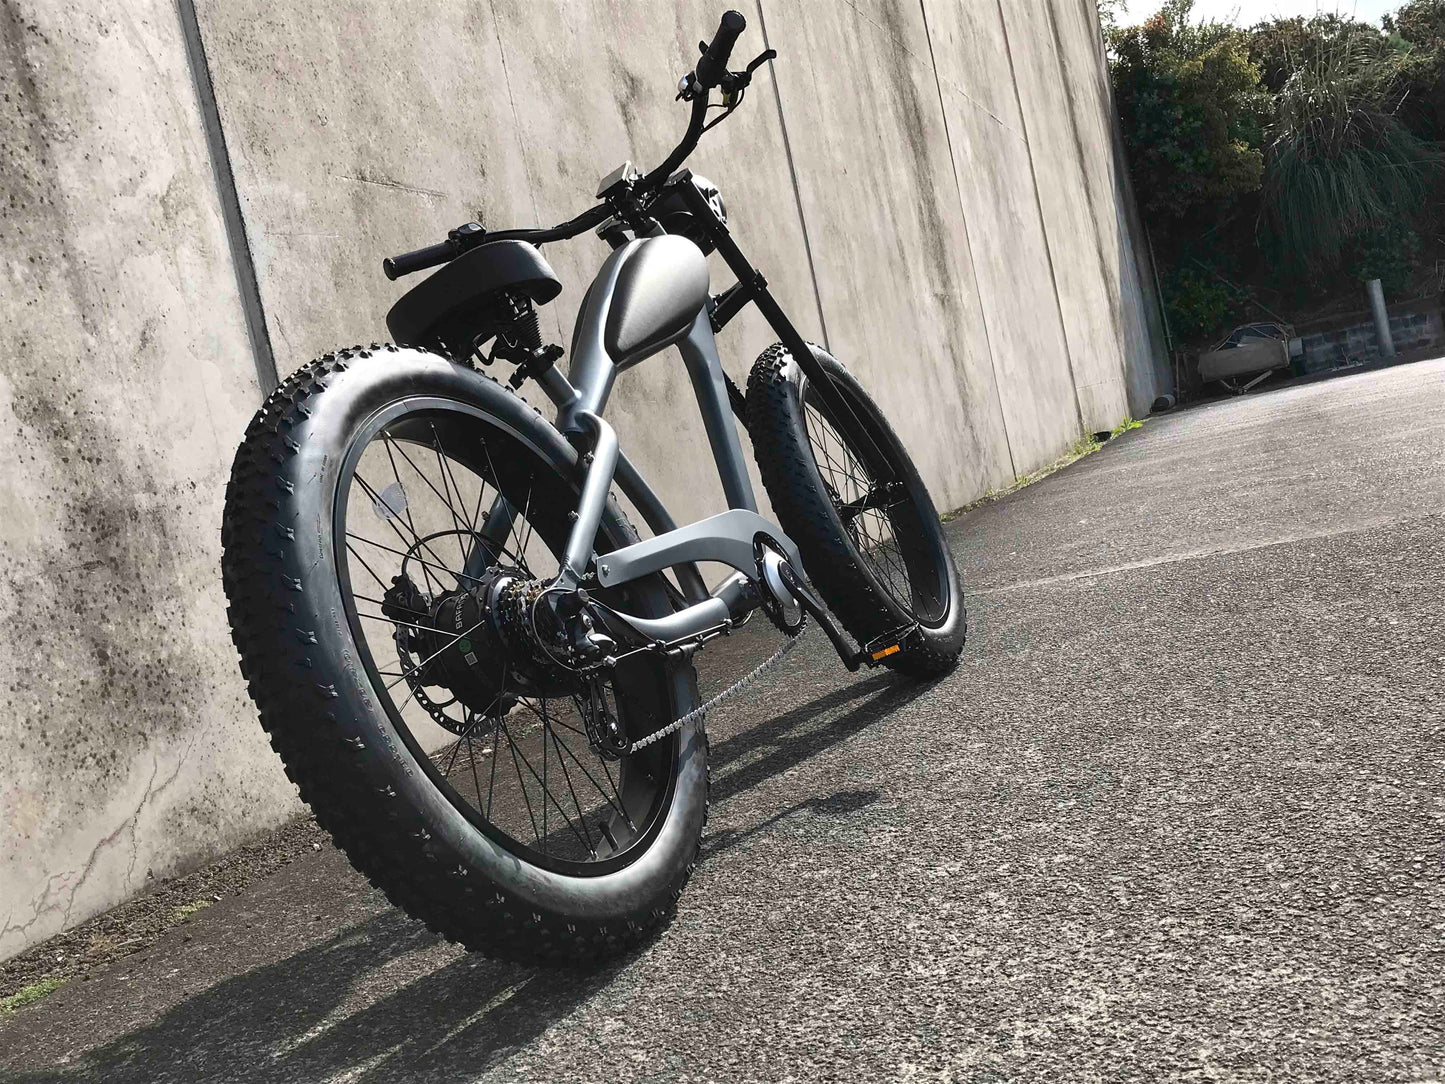 Electric Motorbike Classic styling. The Most Comfortable Cruiser ebike ever. Choice of frame and trim and tyre combinations. All Terrain, STREET or Whitewall tyres. Scout from Boostbikes.